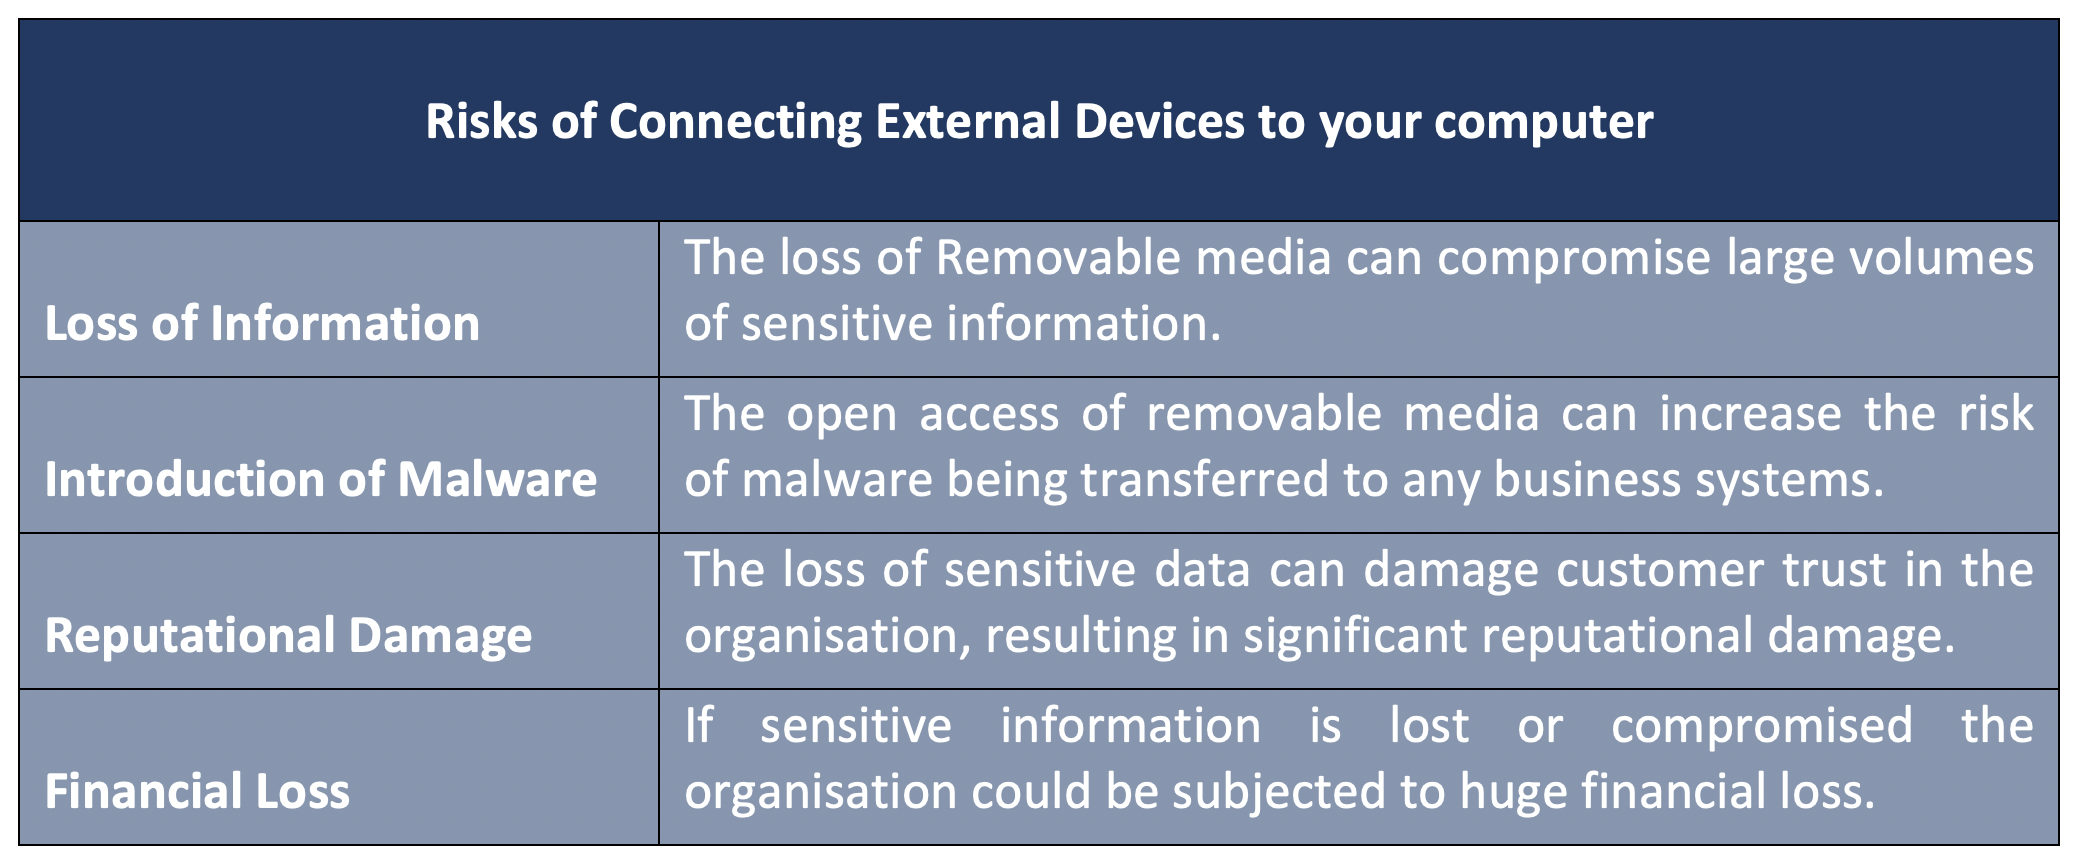 Risks of Connecting External Devices to your computer